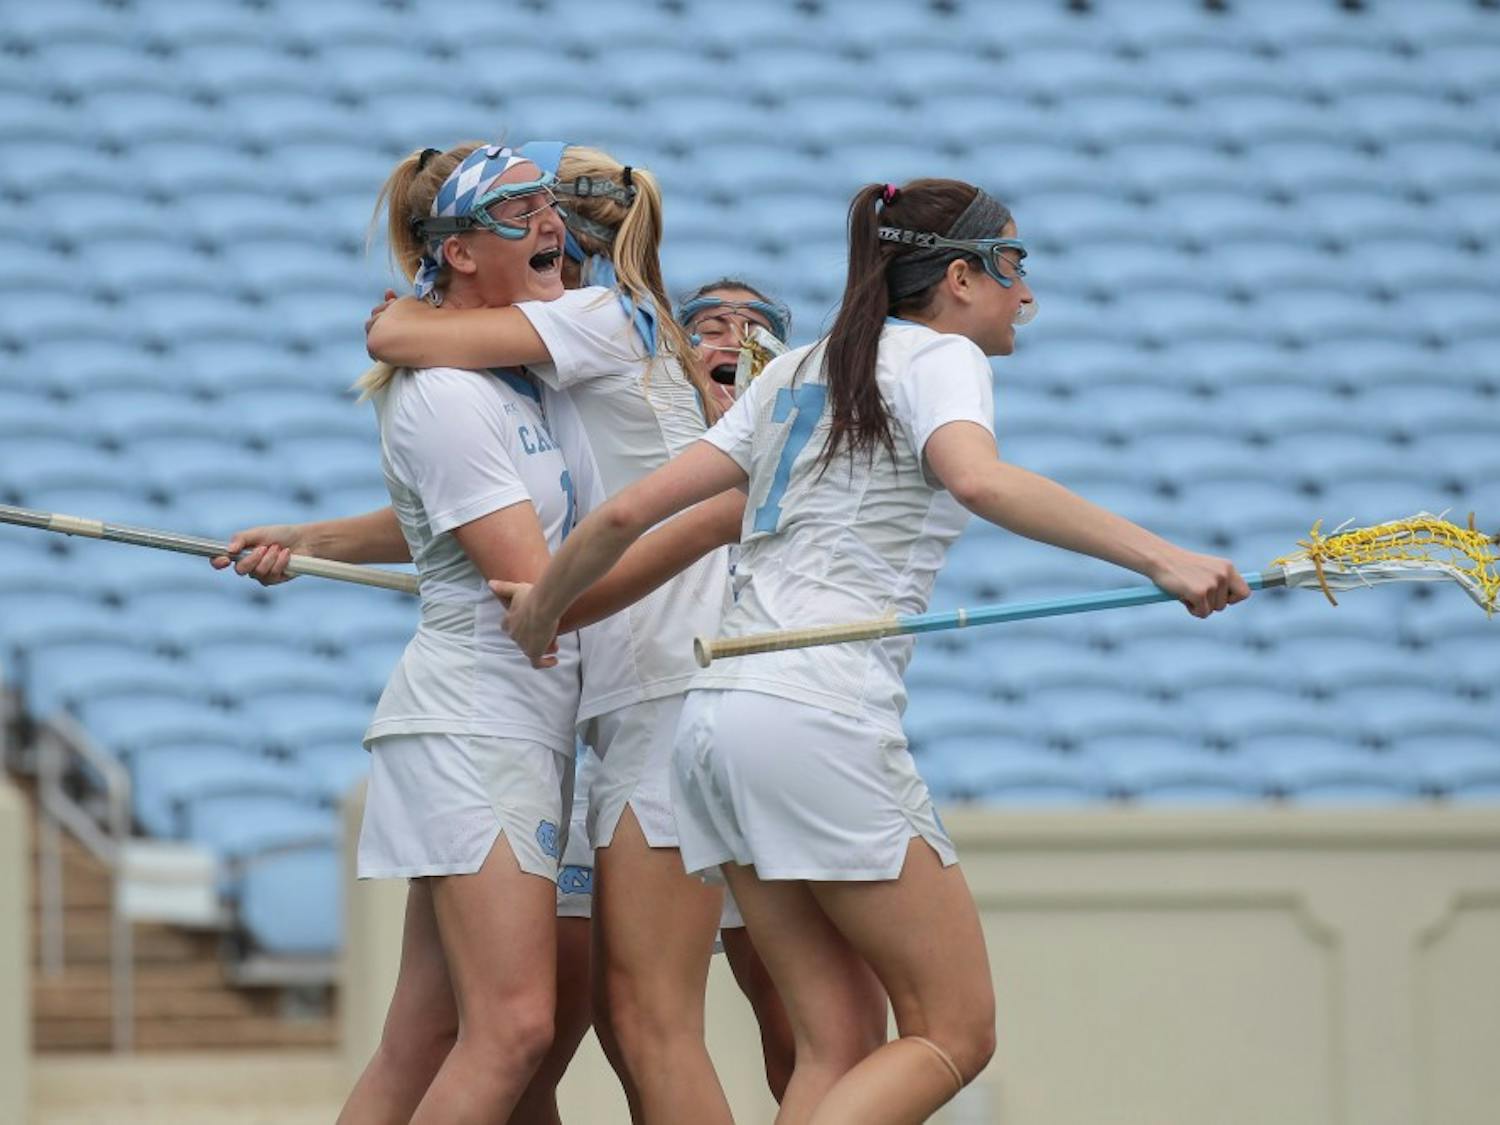 No. 8 UNC women's lacrosse celebrates a goal against no. 1 Maryland on Saturday, Feb. 24.